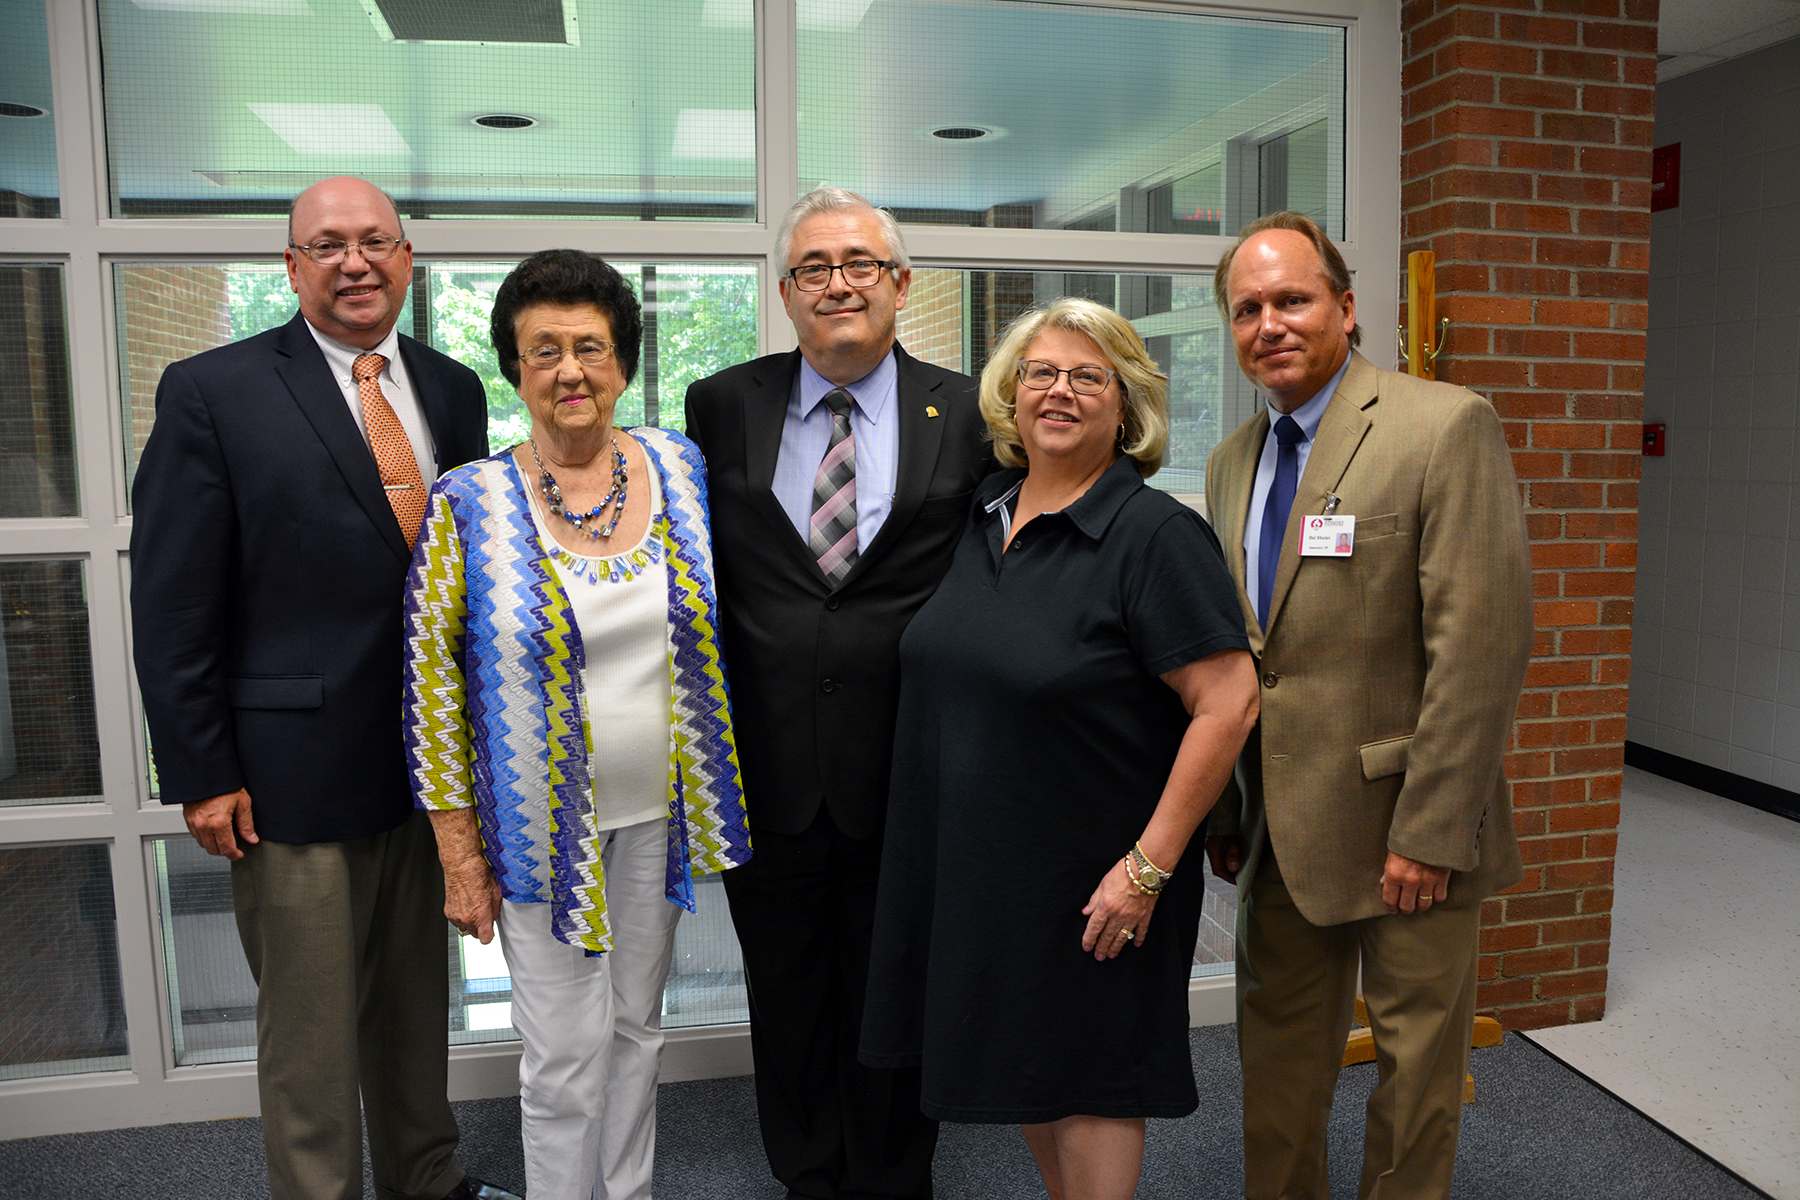 The Dr. R. Kenneth Melvin Memorial Scholarship will be awarded to a student during summer semester at Richmond Community College. Pictured are, from left, Dr. Dale McInnis, president of RichmondCC; Jeannette Melvin, wife of Dr. Melvin; Kenny and Leah Melvin, who established the scholarship; and Dr. Hal Shuler, associate dean of development at RichmondCC.